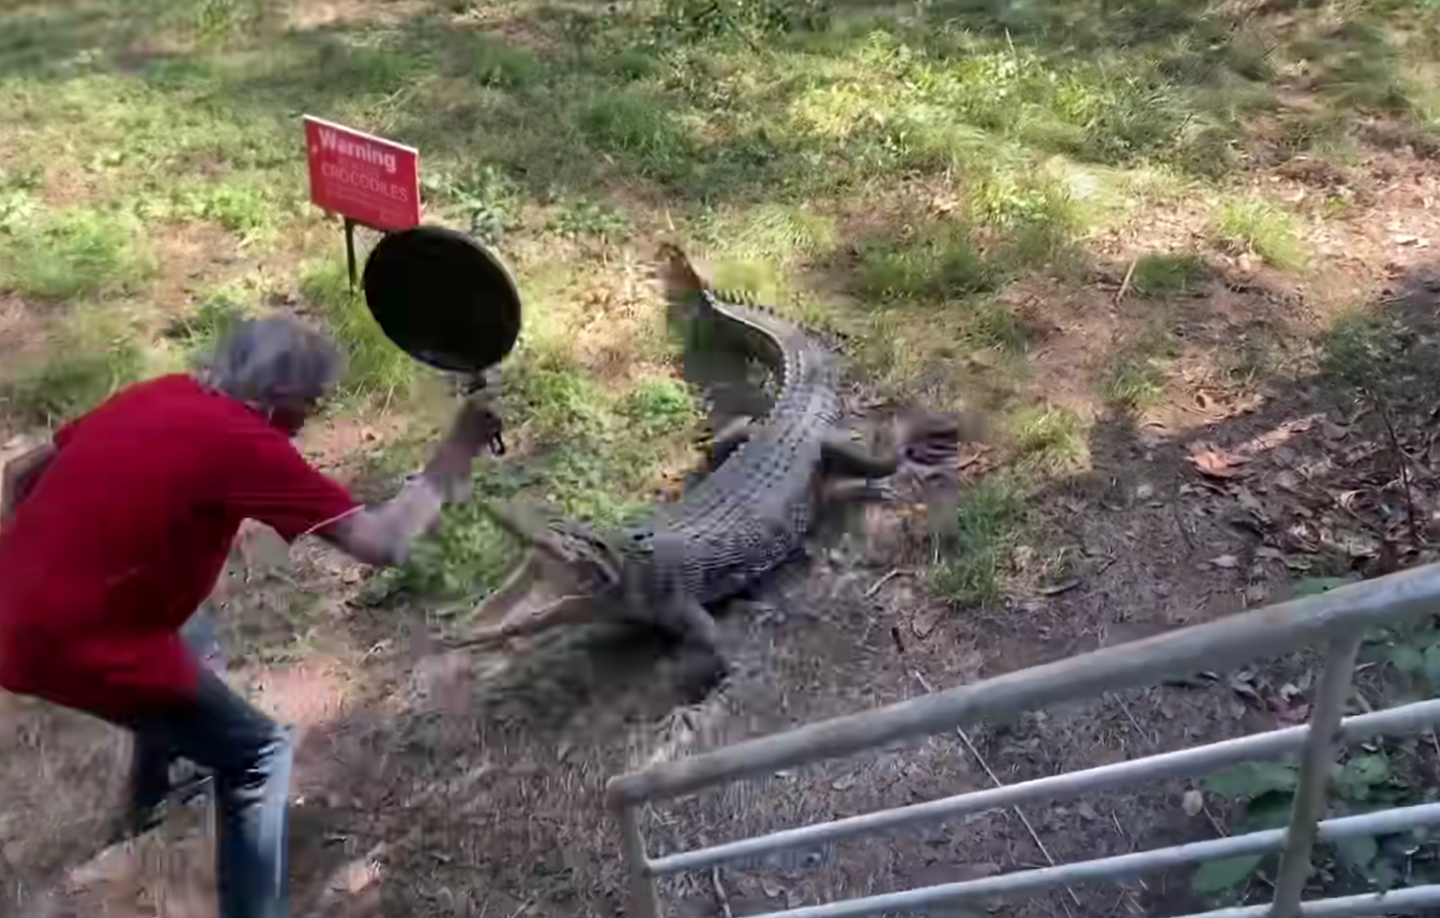 man in red shirt raises pan as crocodile charges